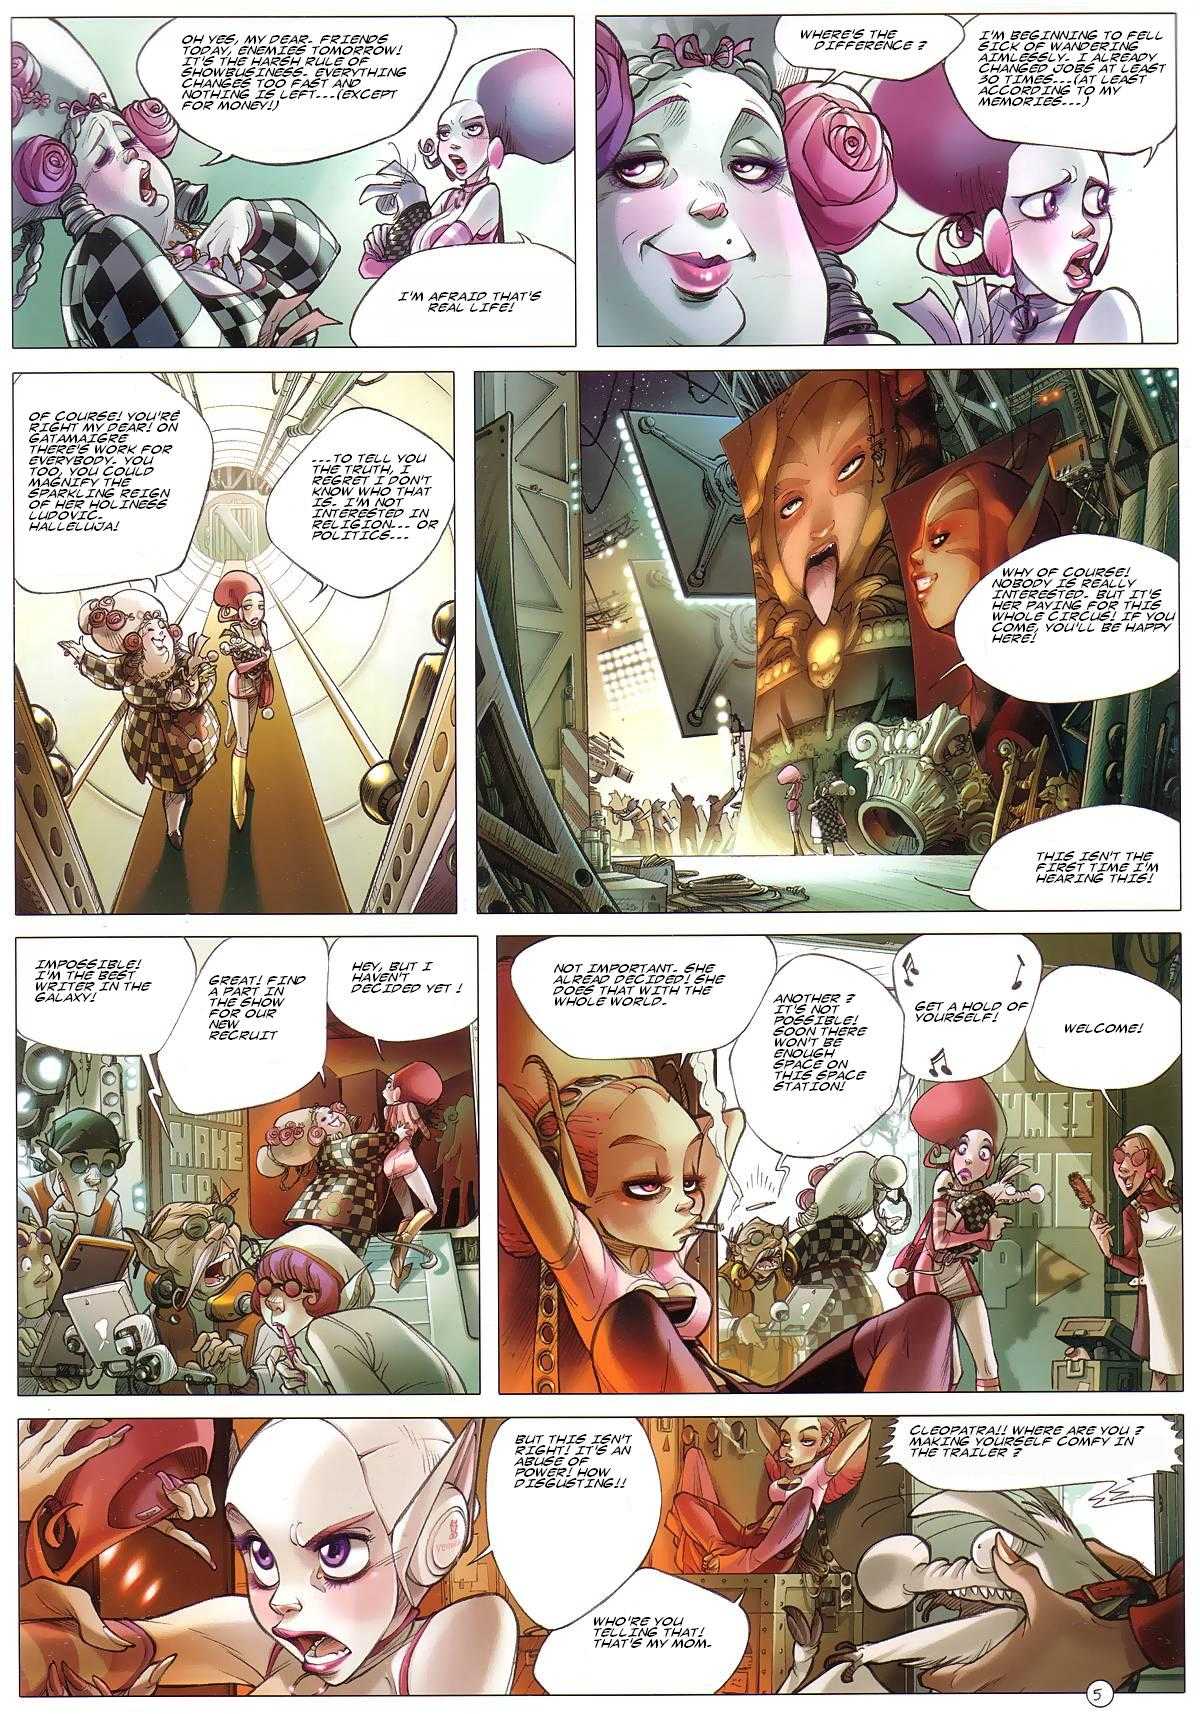 [Marvel Comics] Sky Doll - Issue 3 - The White City ENG 